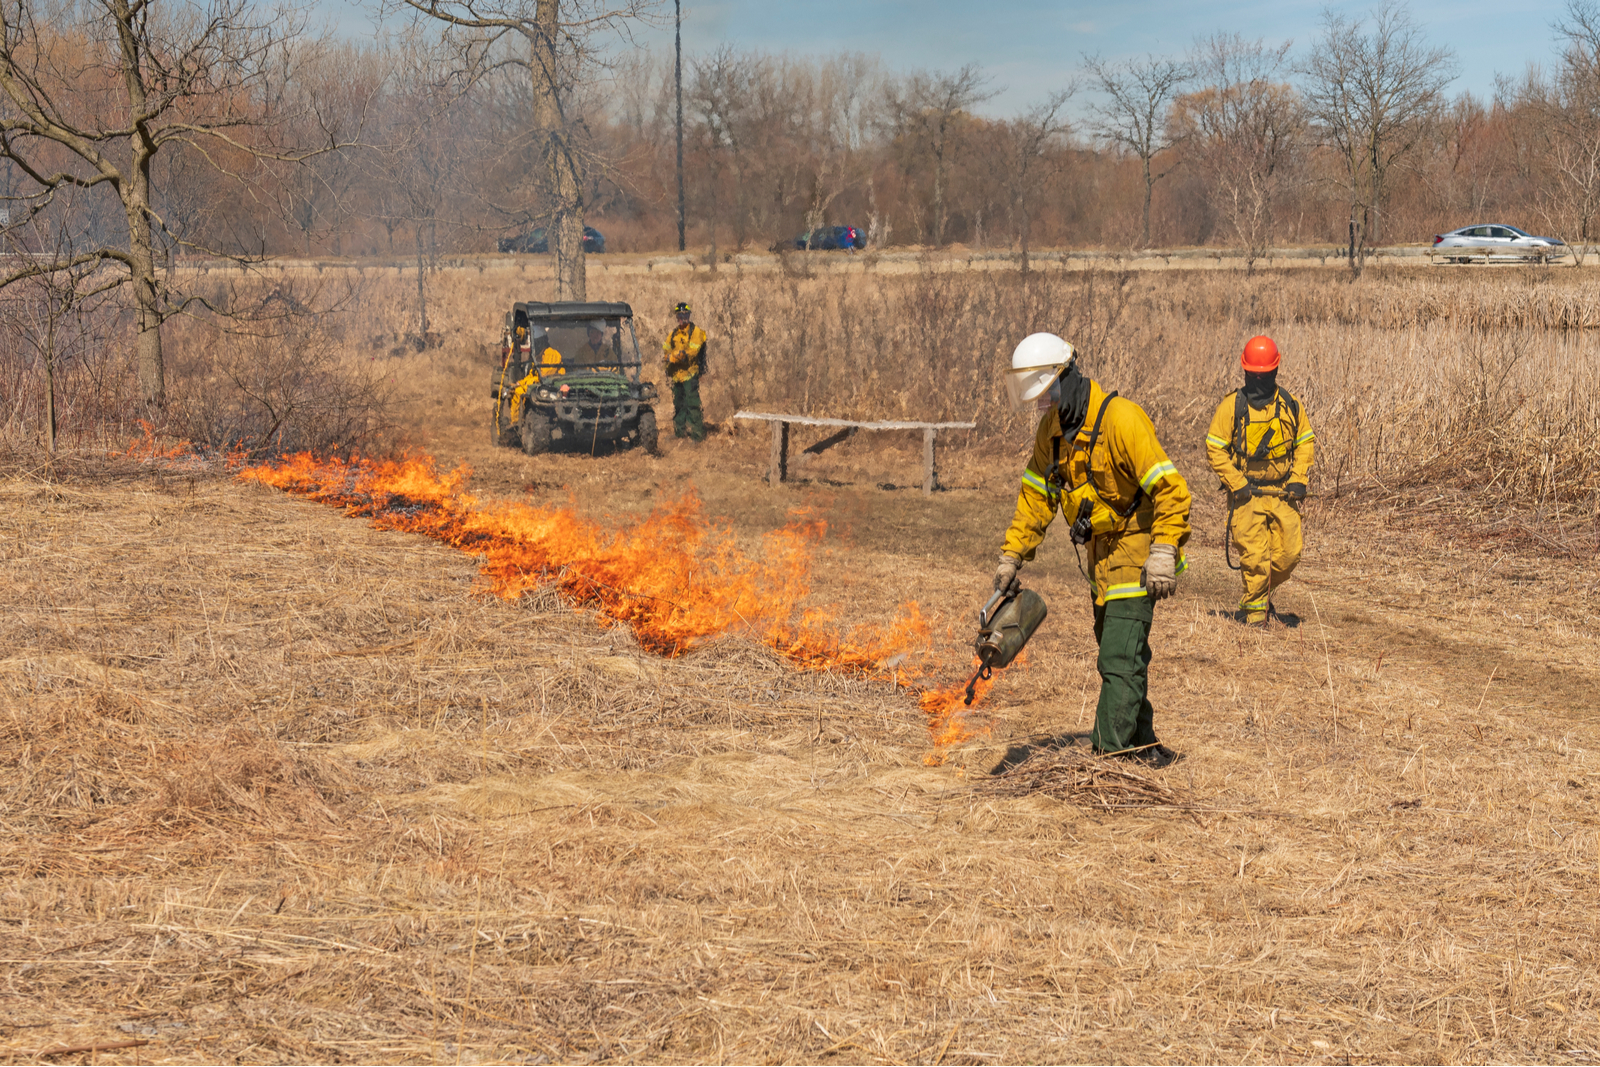 Controlled Burns to Promote Growth of Native Plants